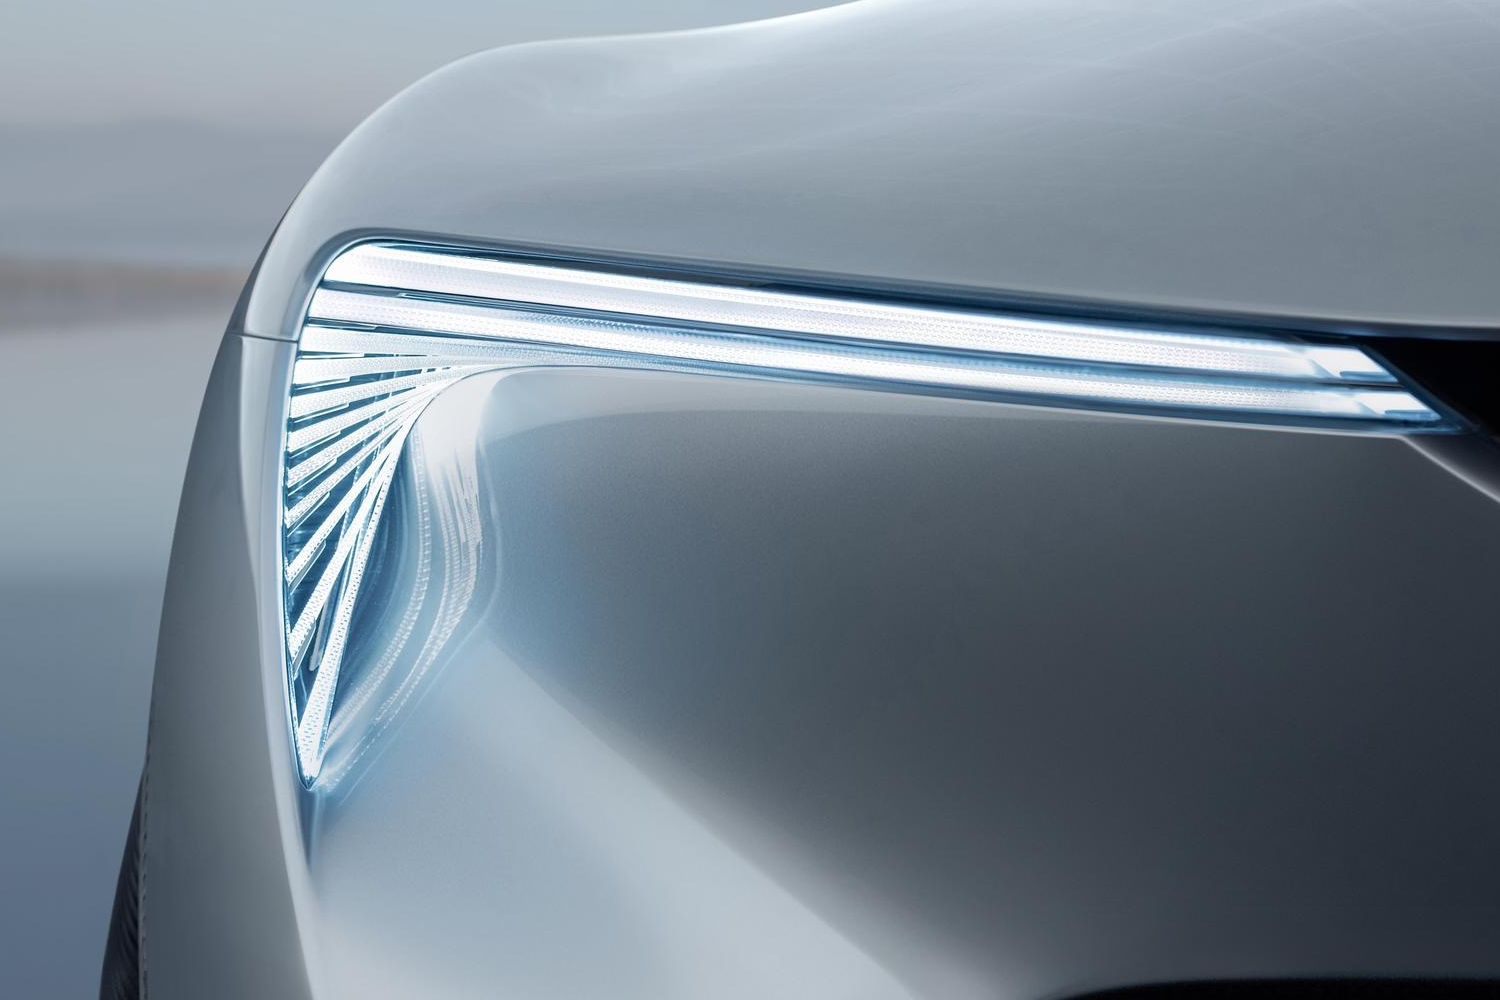 More Details About New Buick Electra Concept Revealed | GM Authority